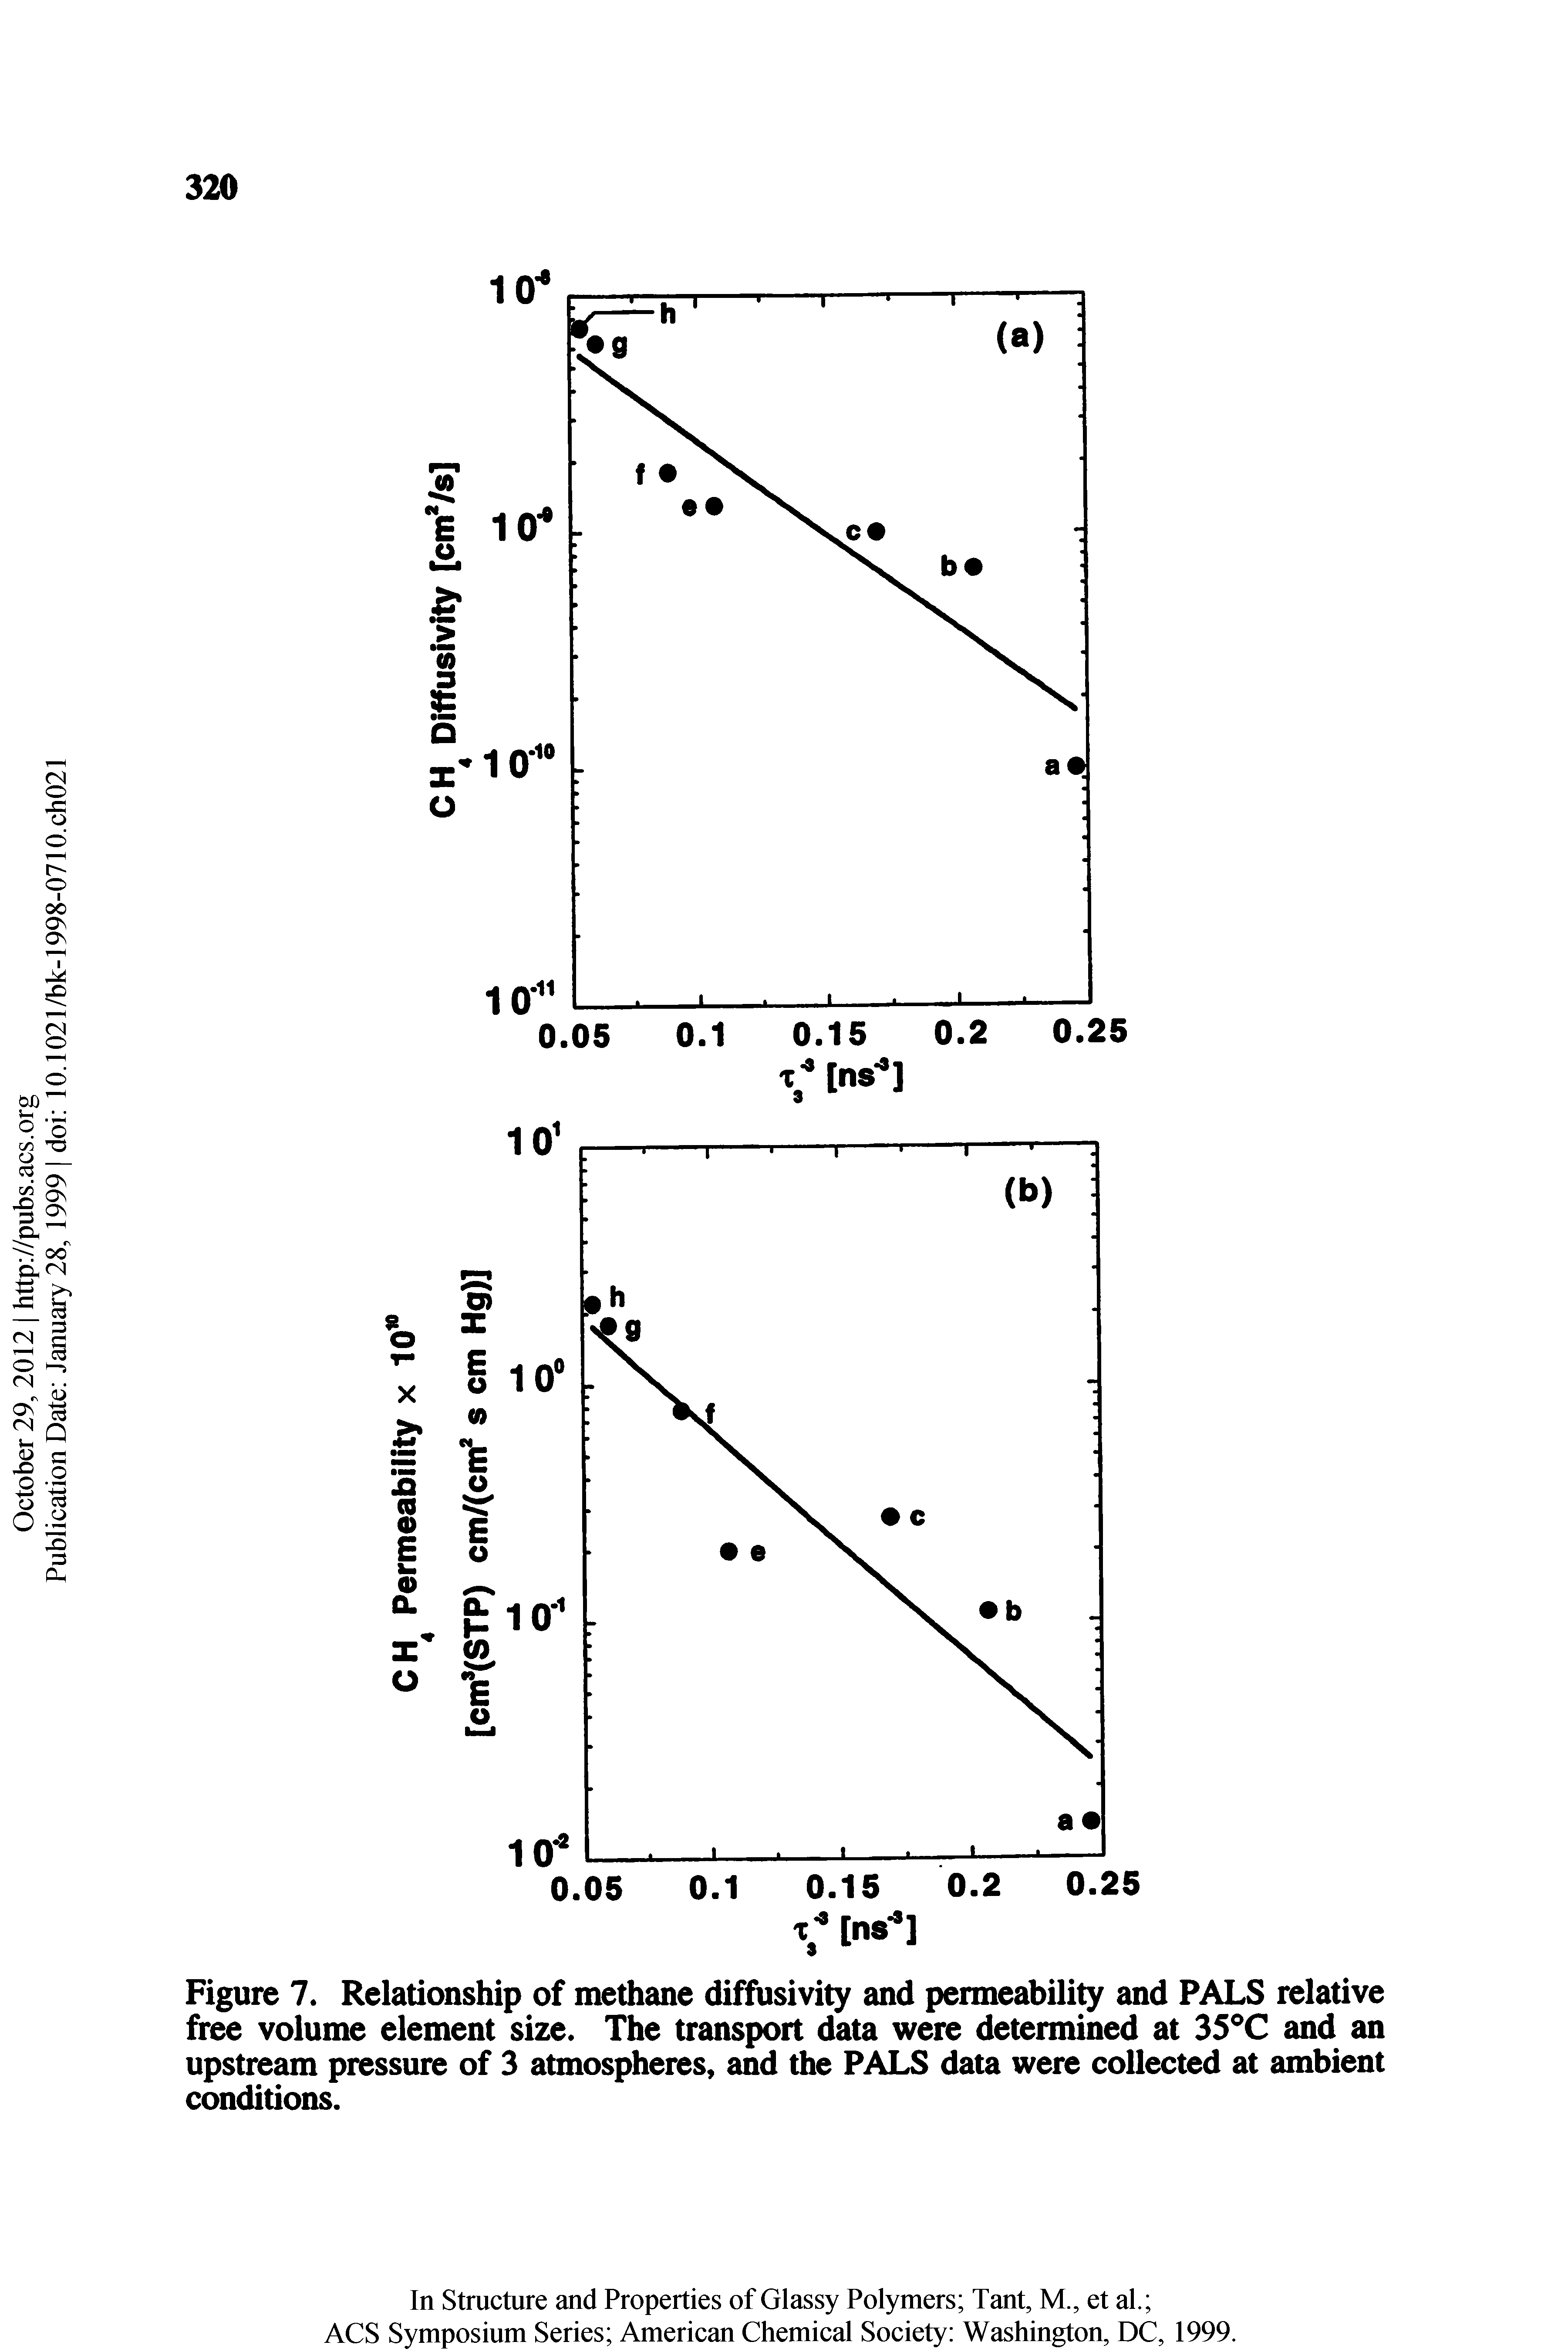 Figure 7. Relationship of methane diffusivity and permeability and PALS relative free volume element size. The transport data were determined at 3S C and an upstream pressure of 3 atmospheres, and the PALS data were collected at ambient conditions.